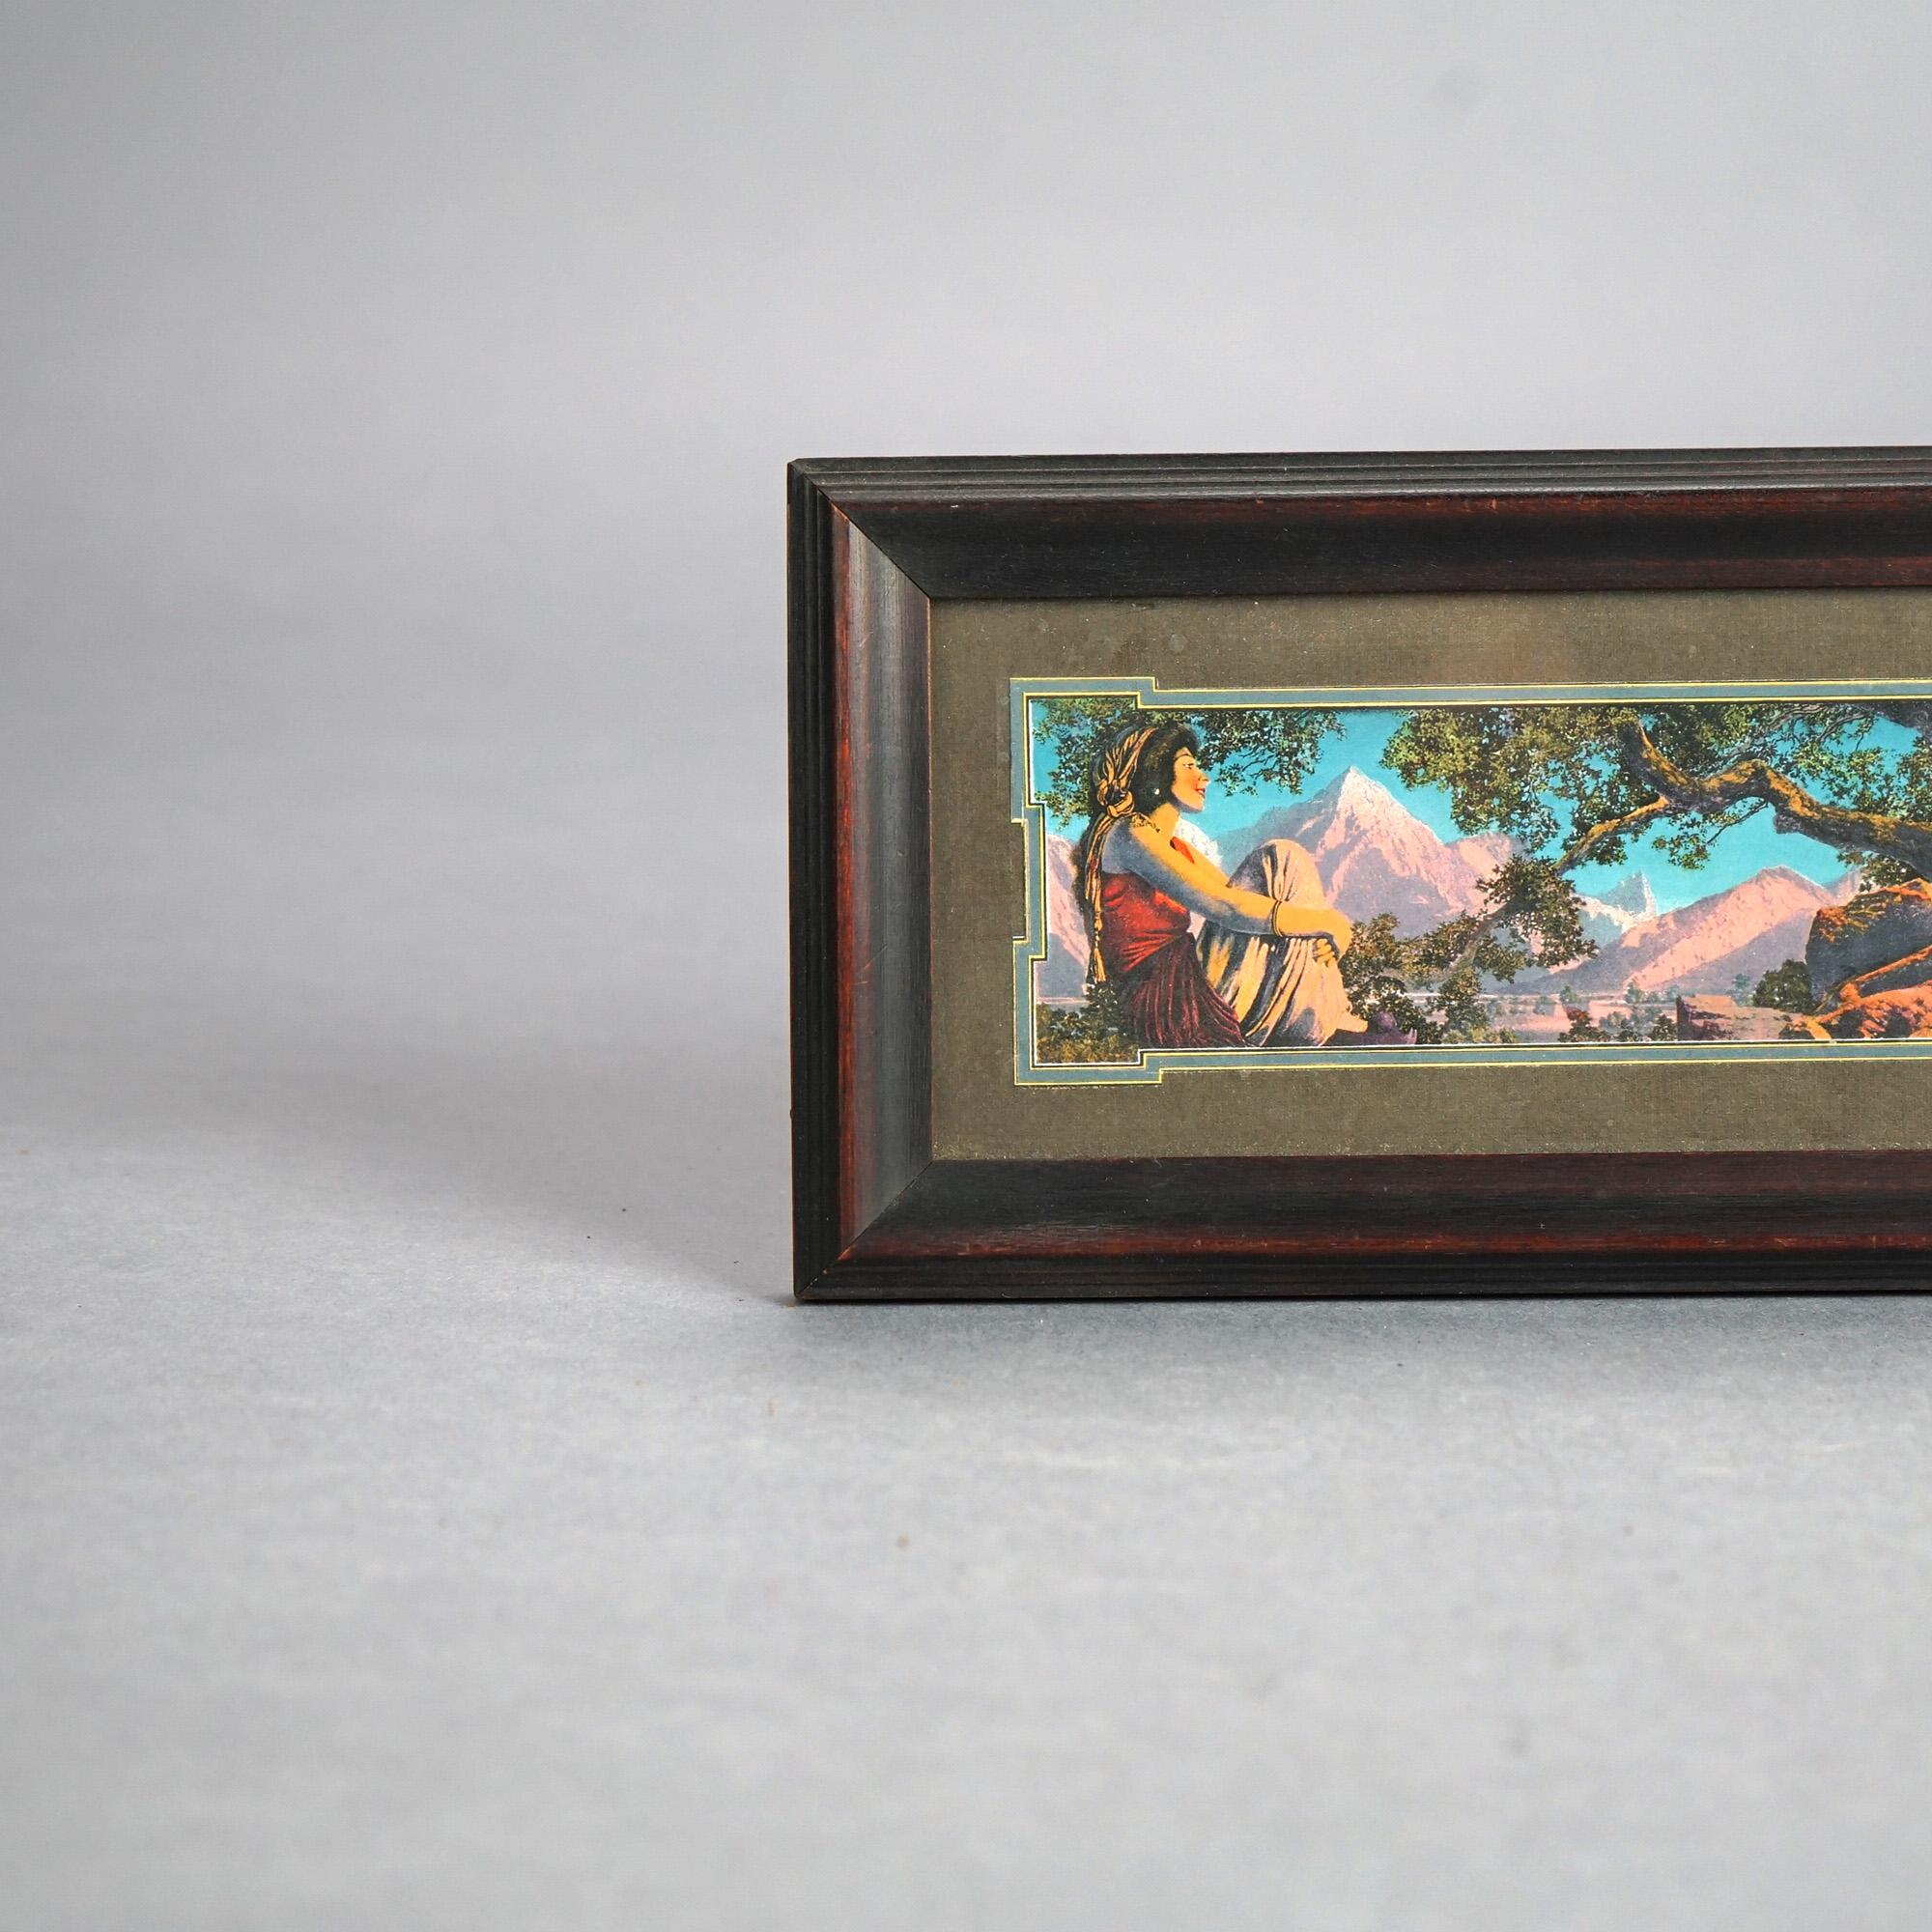 Antique Rubaiyat Art Deco Maxfield Parrish Print, Framed, C1920 In Good Condition For Sale In Big Flats, NY